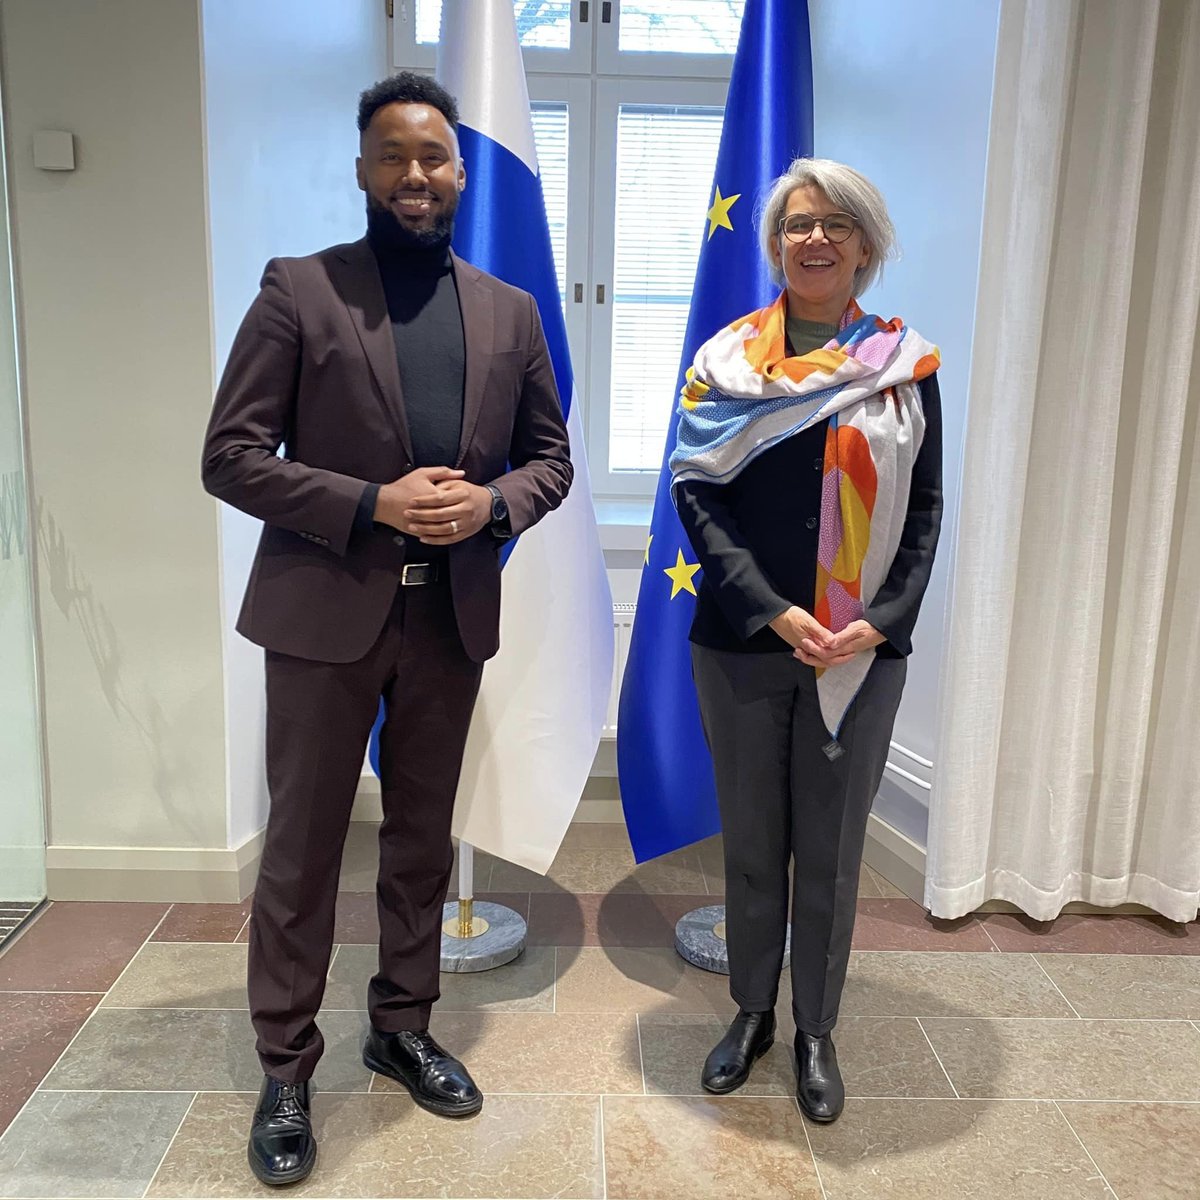 Suldaan työn touhussa. 'Very glad to have met today at the Ministery for Foreign Affairs 📷 the EU Special Representative for the #HornofAfrica Annette Weber and discuss about the developments in the region.' Jos EU:lla on oma erityisedustajansa, mihin Suldaania tarvitaan?